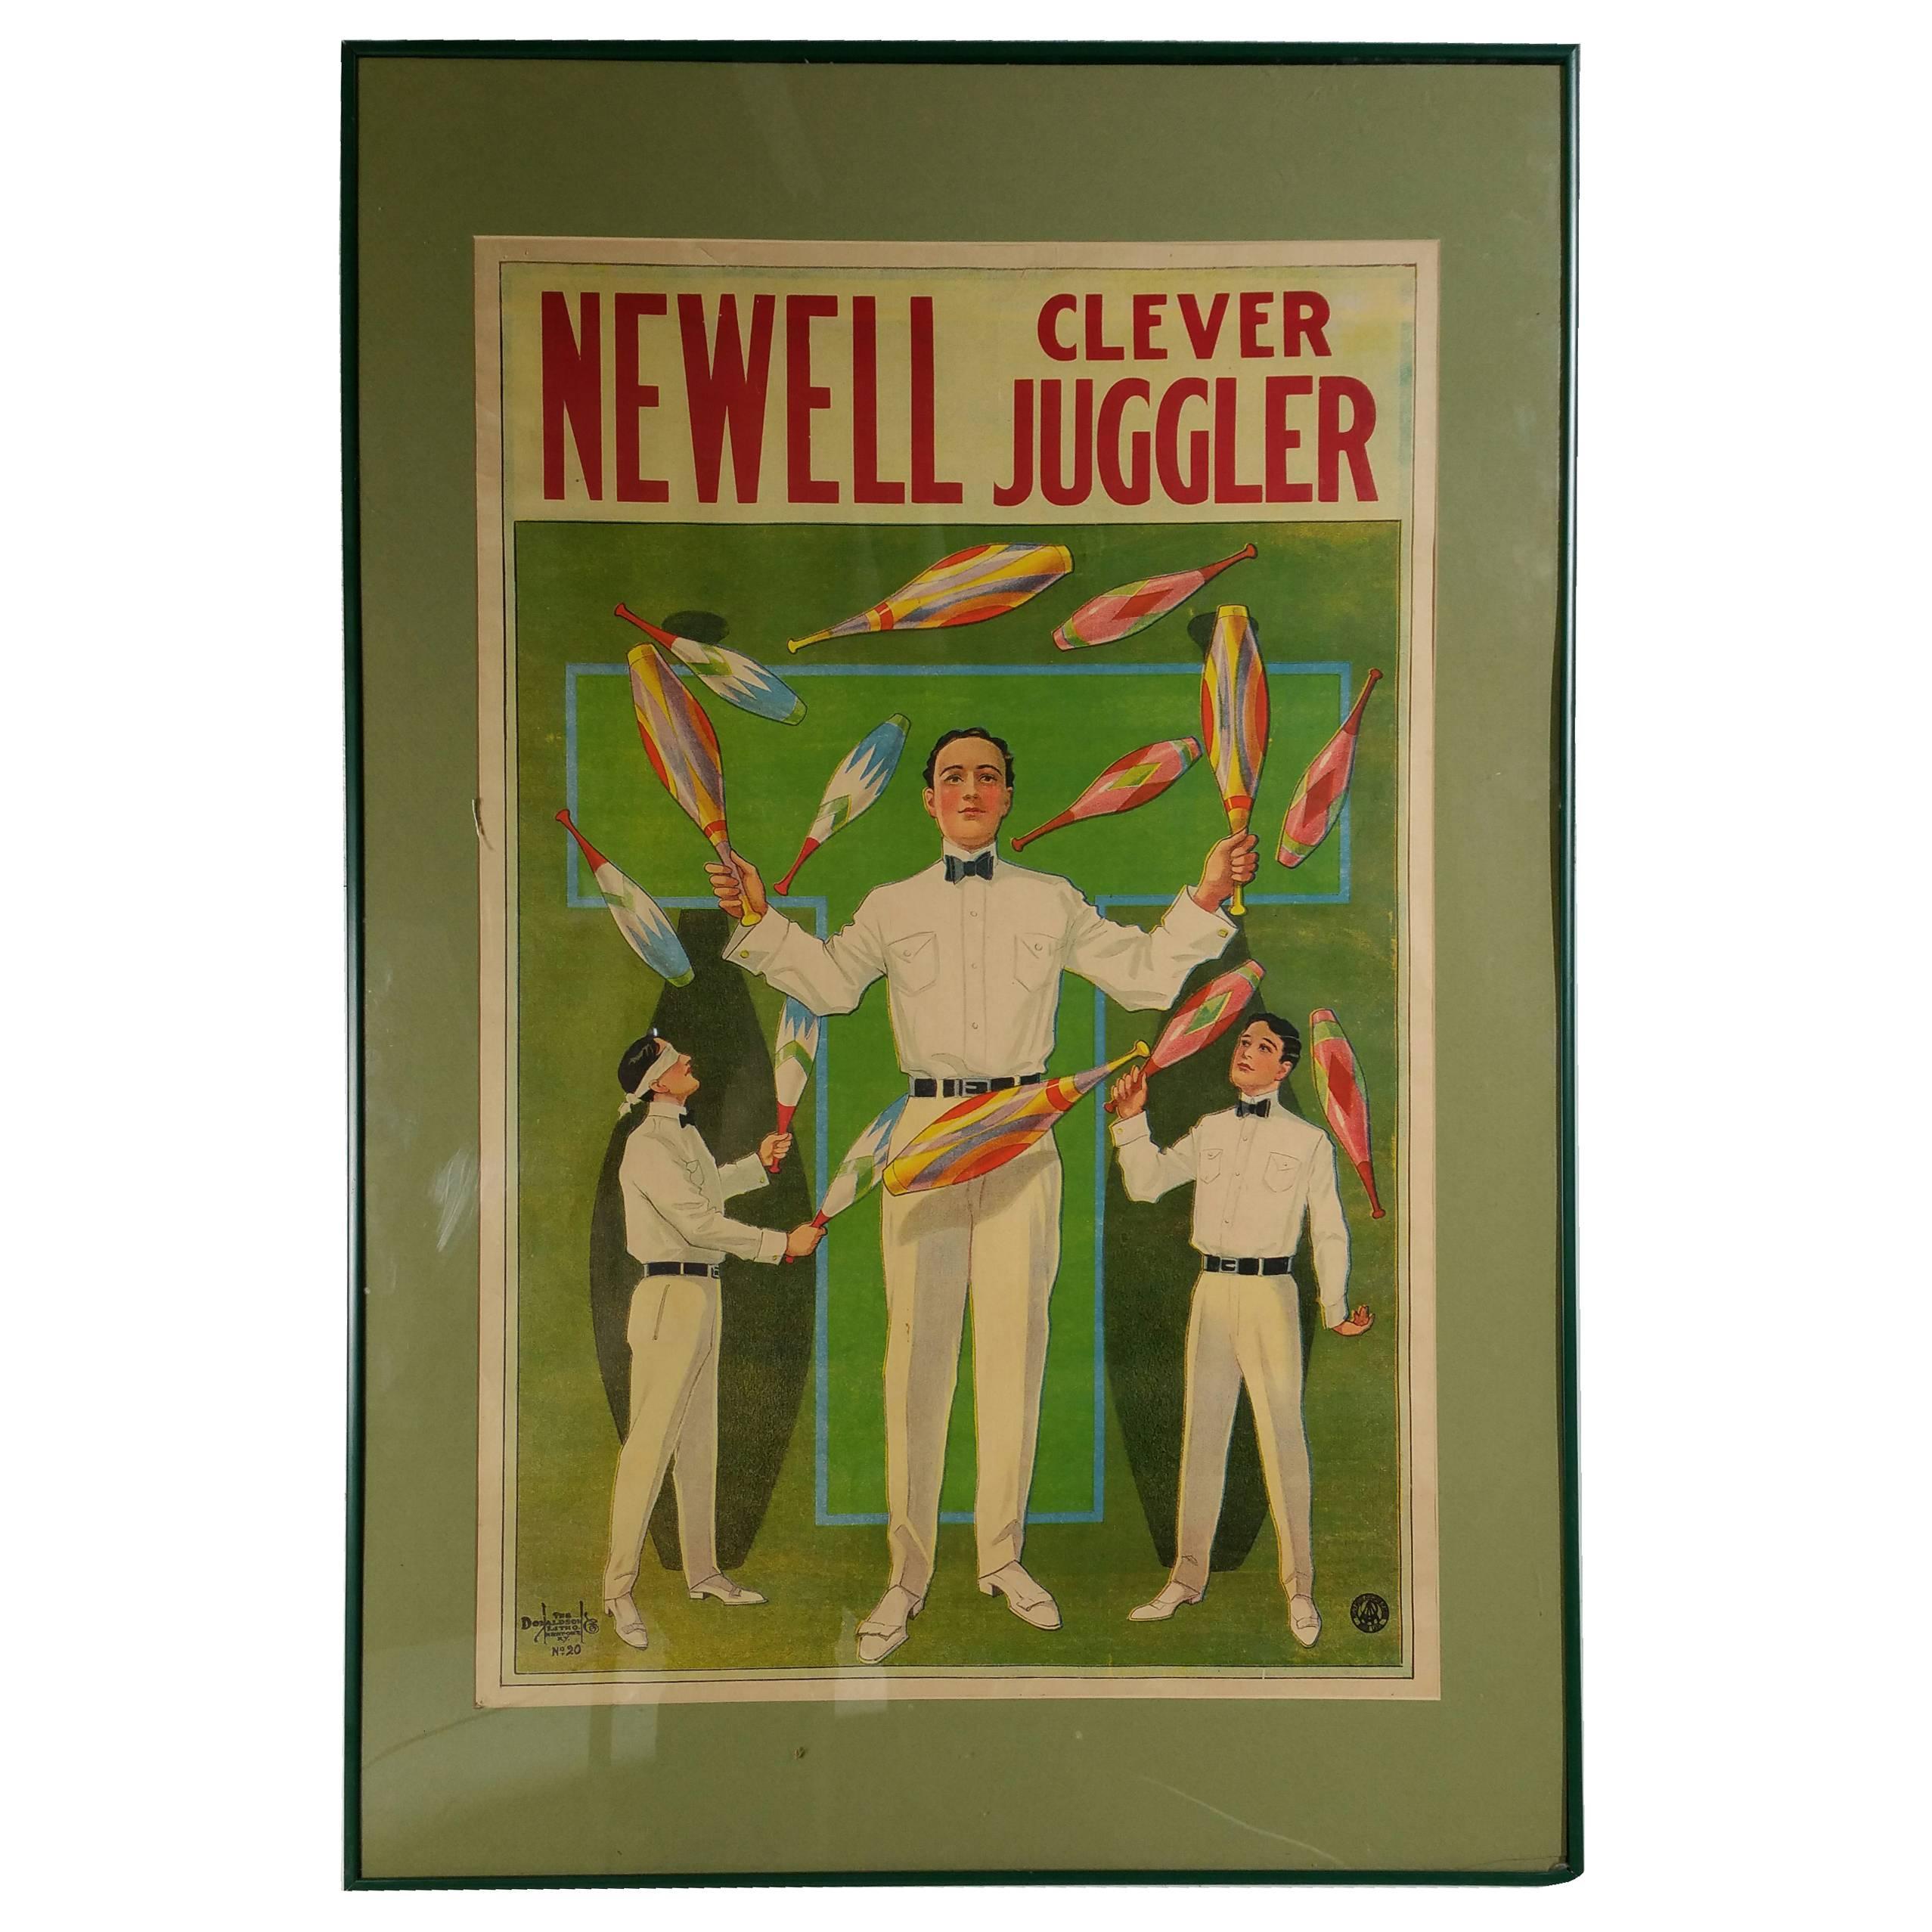 Rare 'Newell Clever Juggler' Lithograph, Donaldson Litho